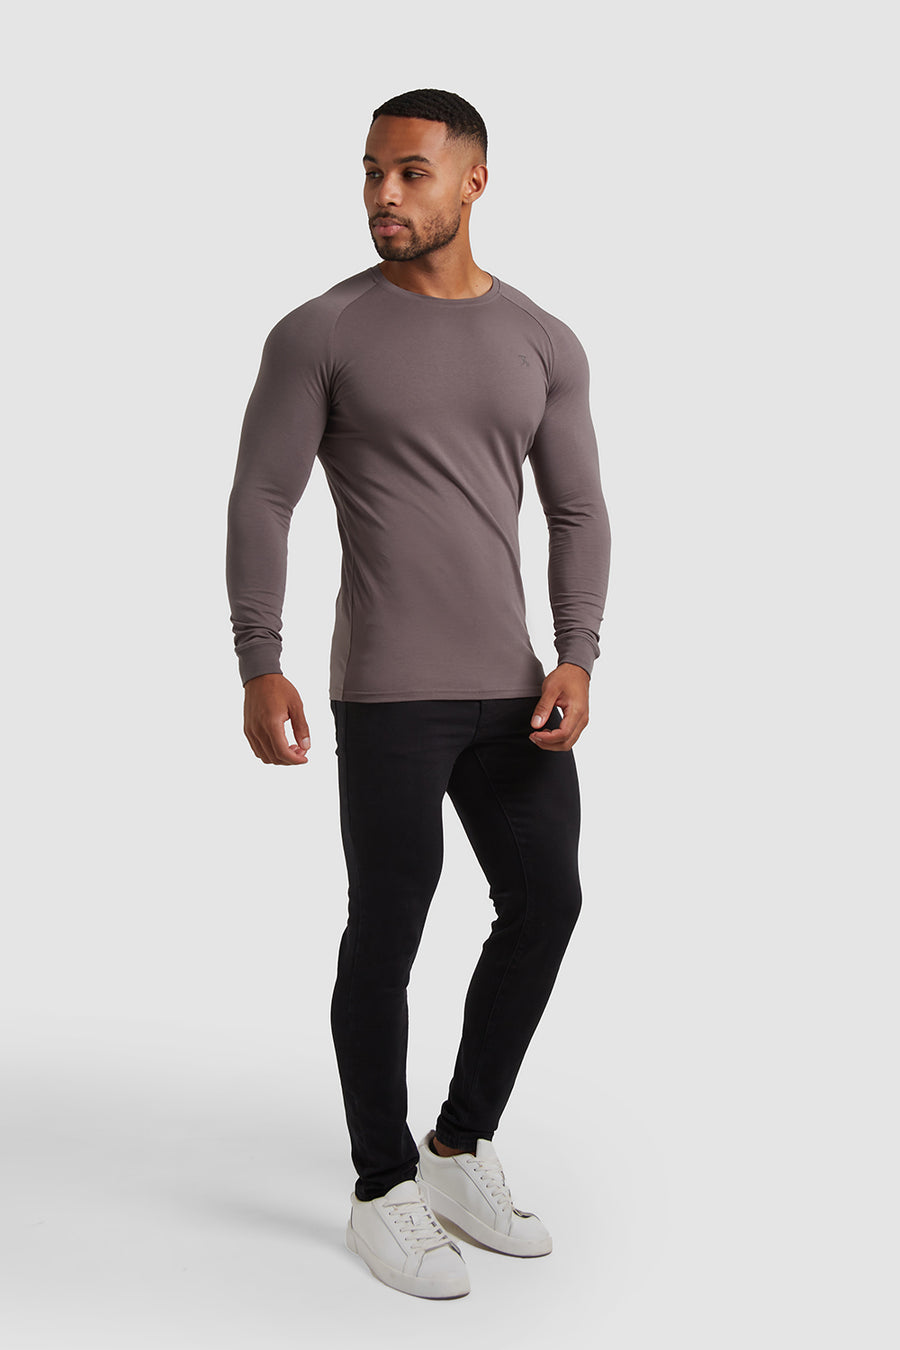 Athletic Fit T-Shirt (LS) in Mole - TAILORED ATHLETE - USA